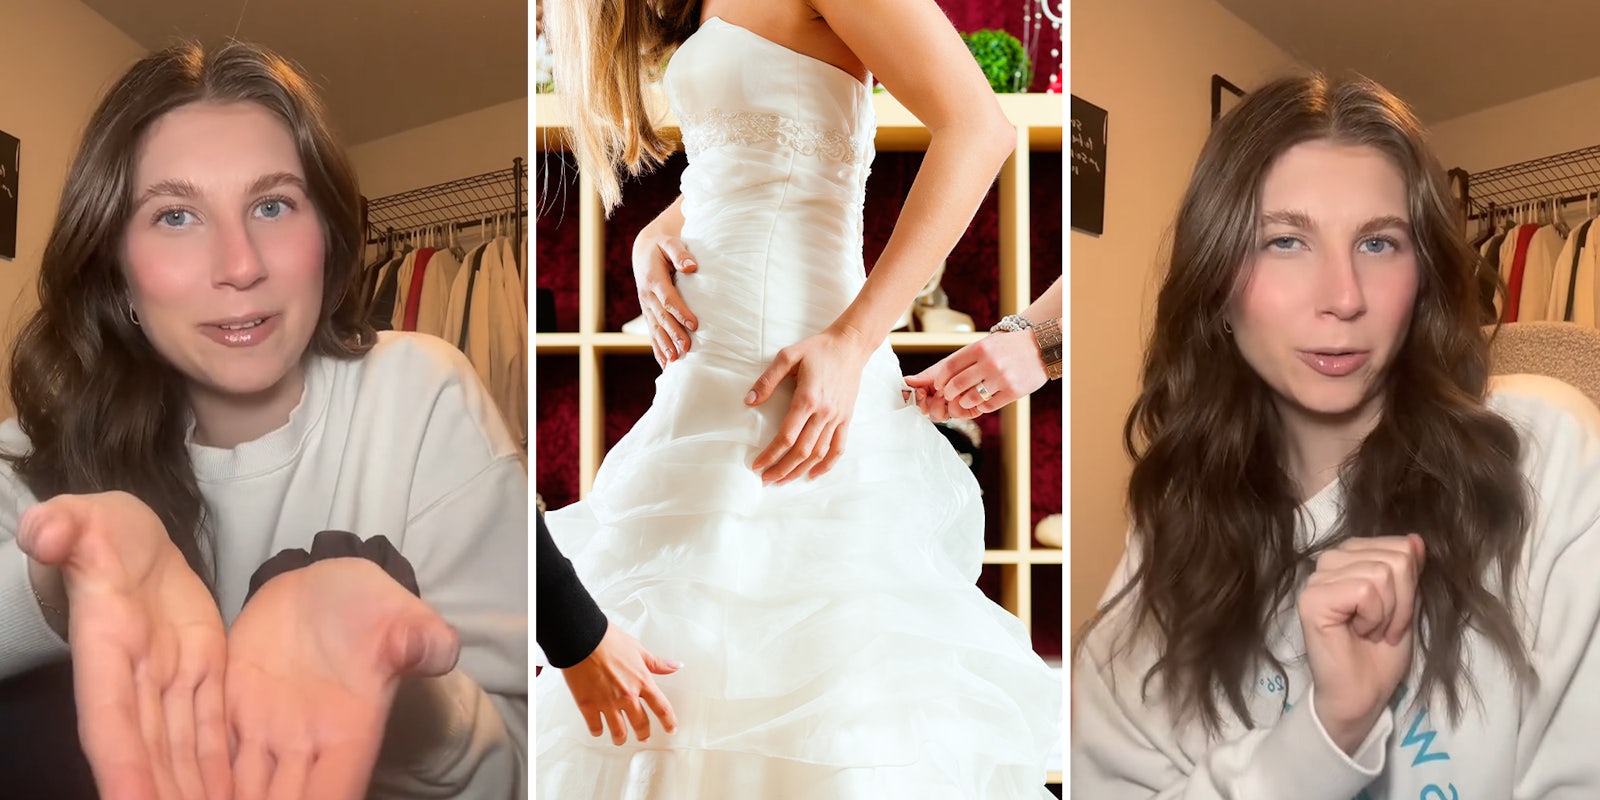 Bride-to-be shopping for already expensive wedding dress gets asked to leave a 10% tip